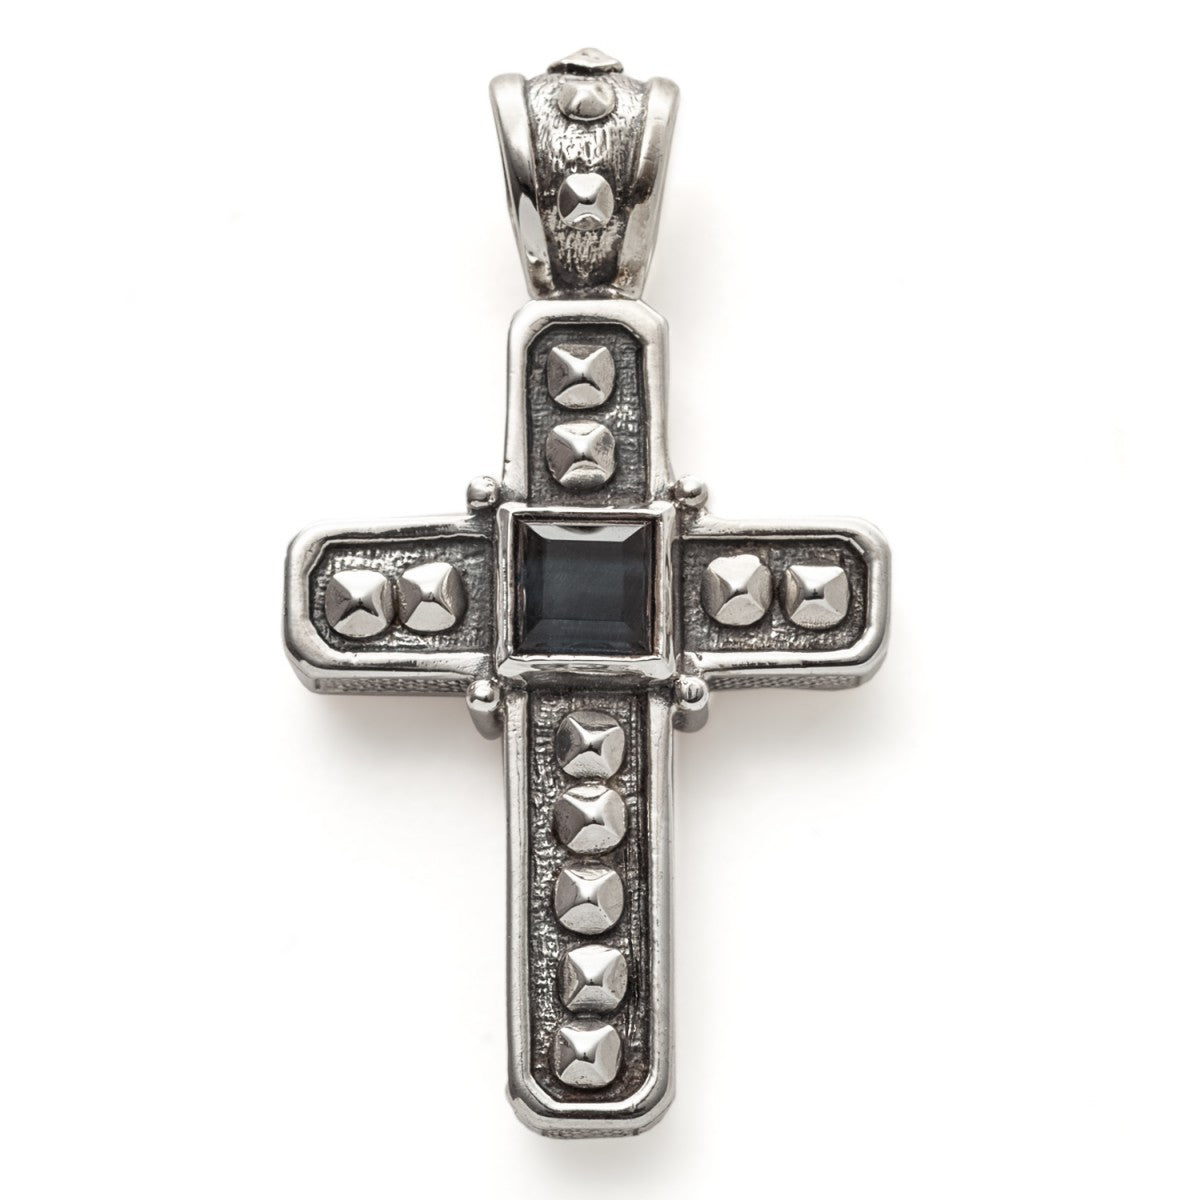 Konstantino Men's Hephaestus Collection Sterling Silver and Onyx Cross Pendant